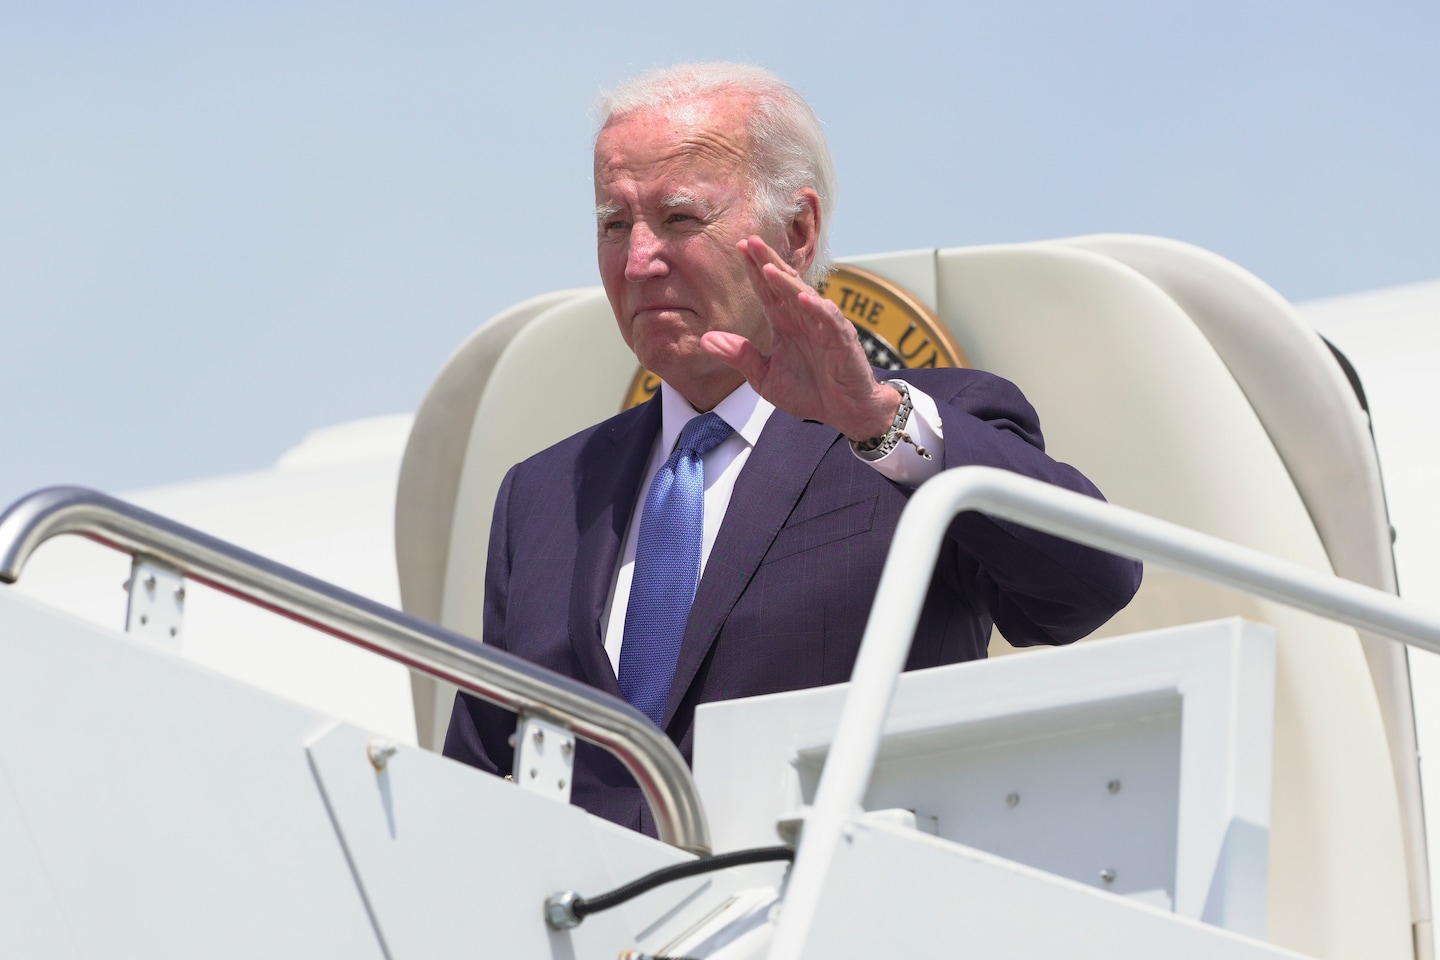 Trump's rhetoric fuels conspiracy theories about Biden withdrawing from election